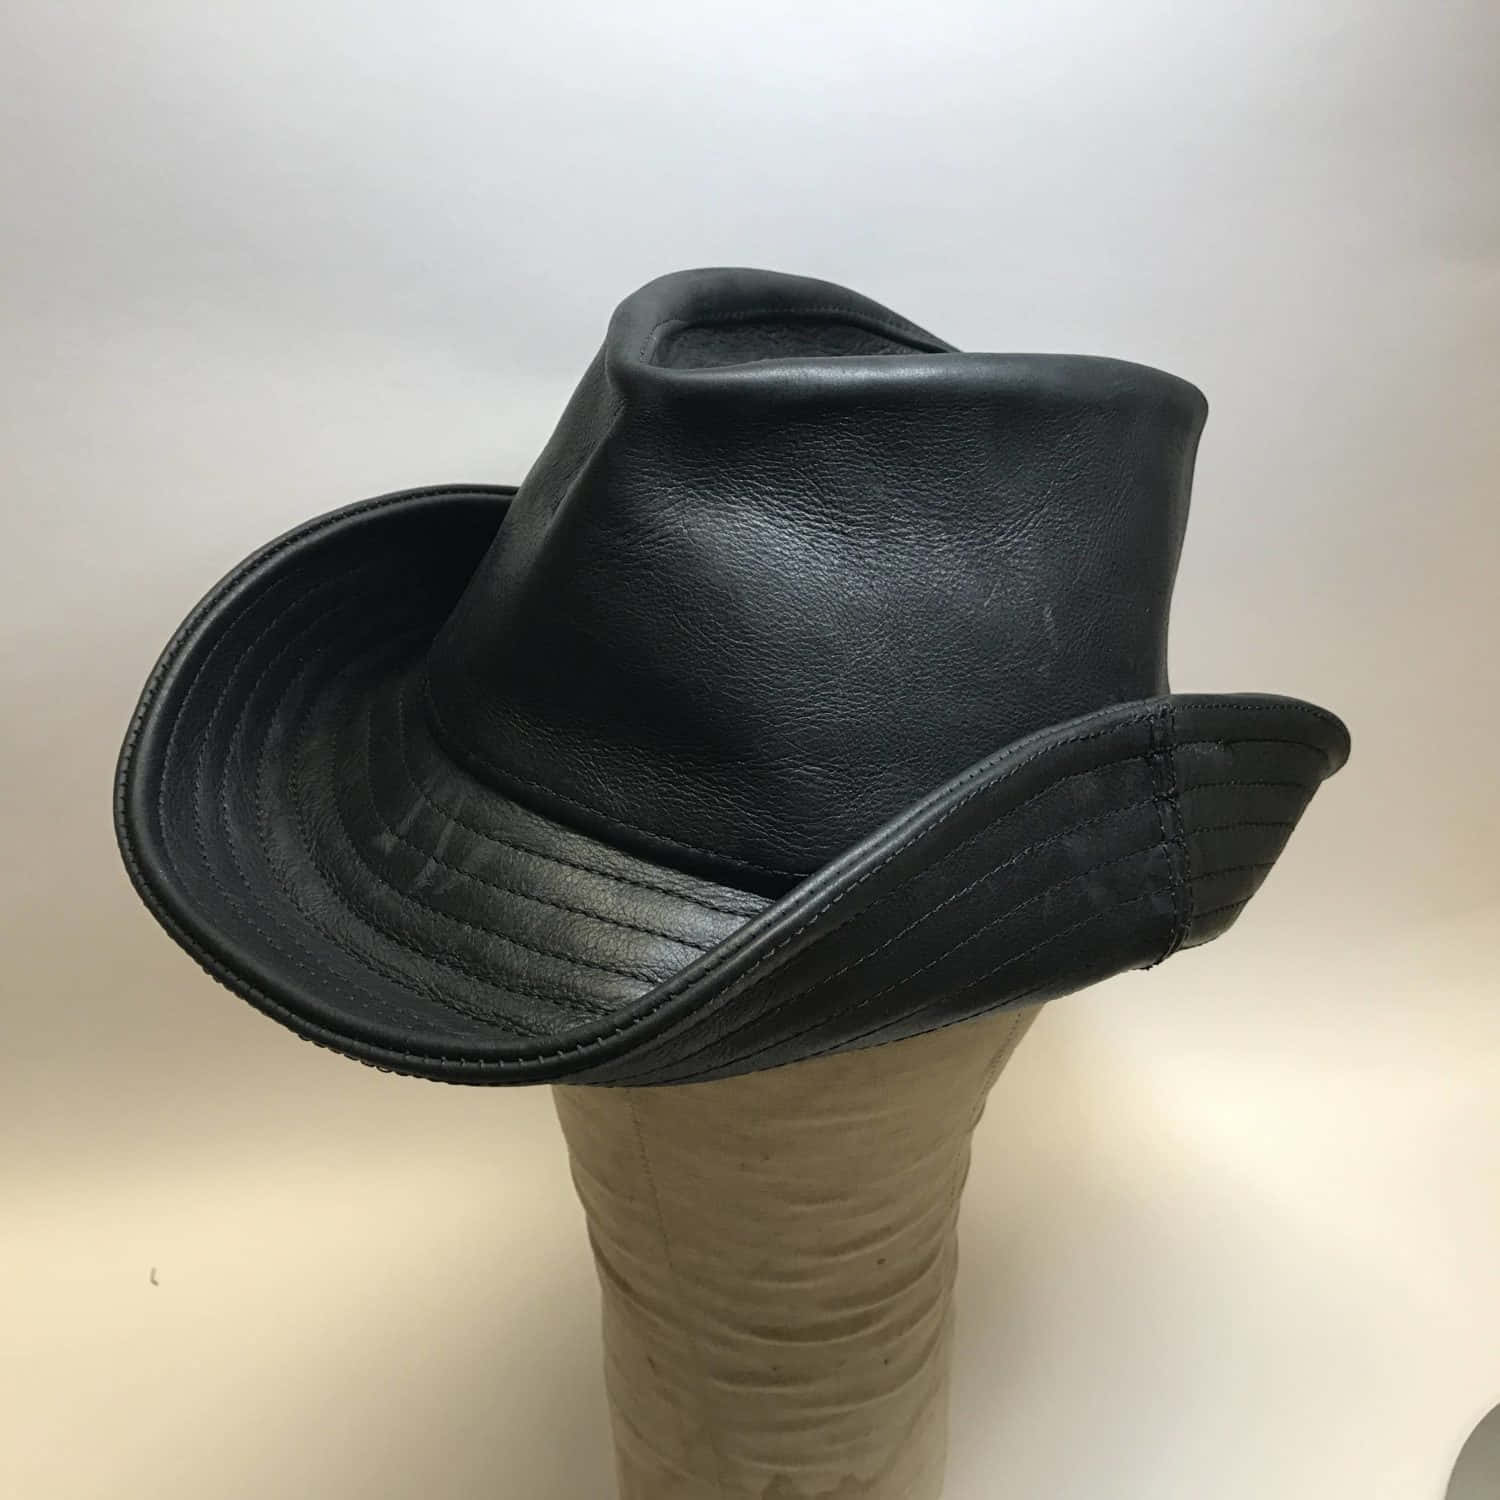 "Stylish Cowboy Hat Perfect For Your Western-Themed Outfit"